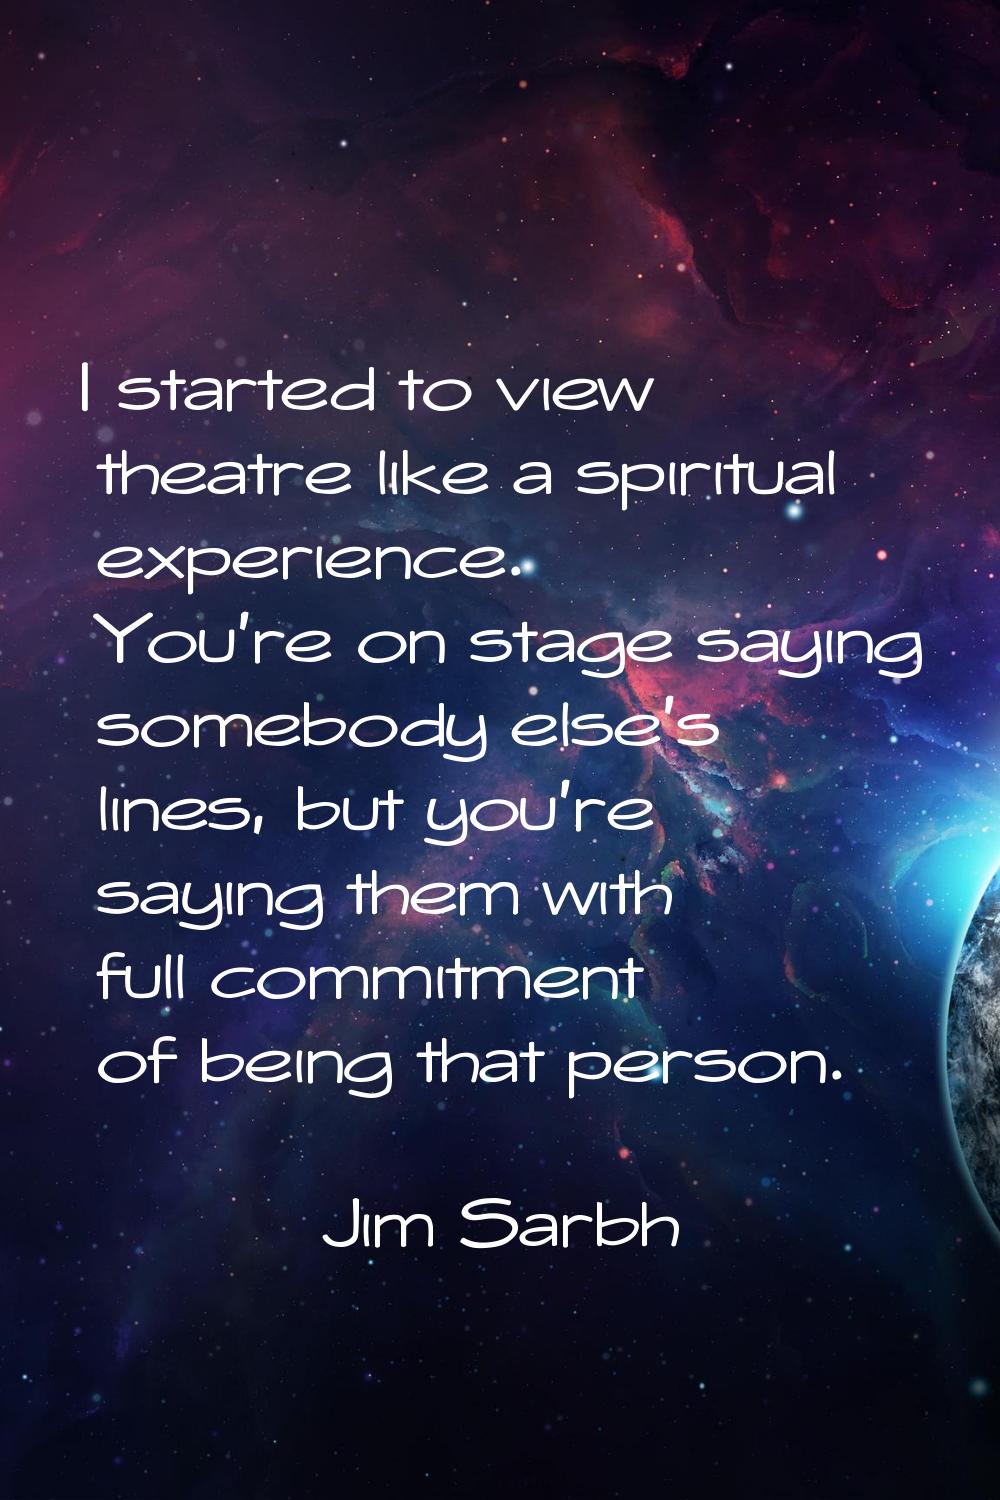 I started to view theatre like a spiritual experience. You're on stage saying somebody else's lines